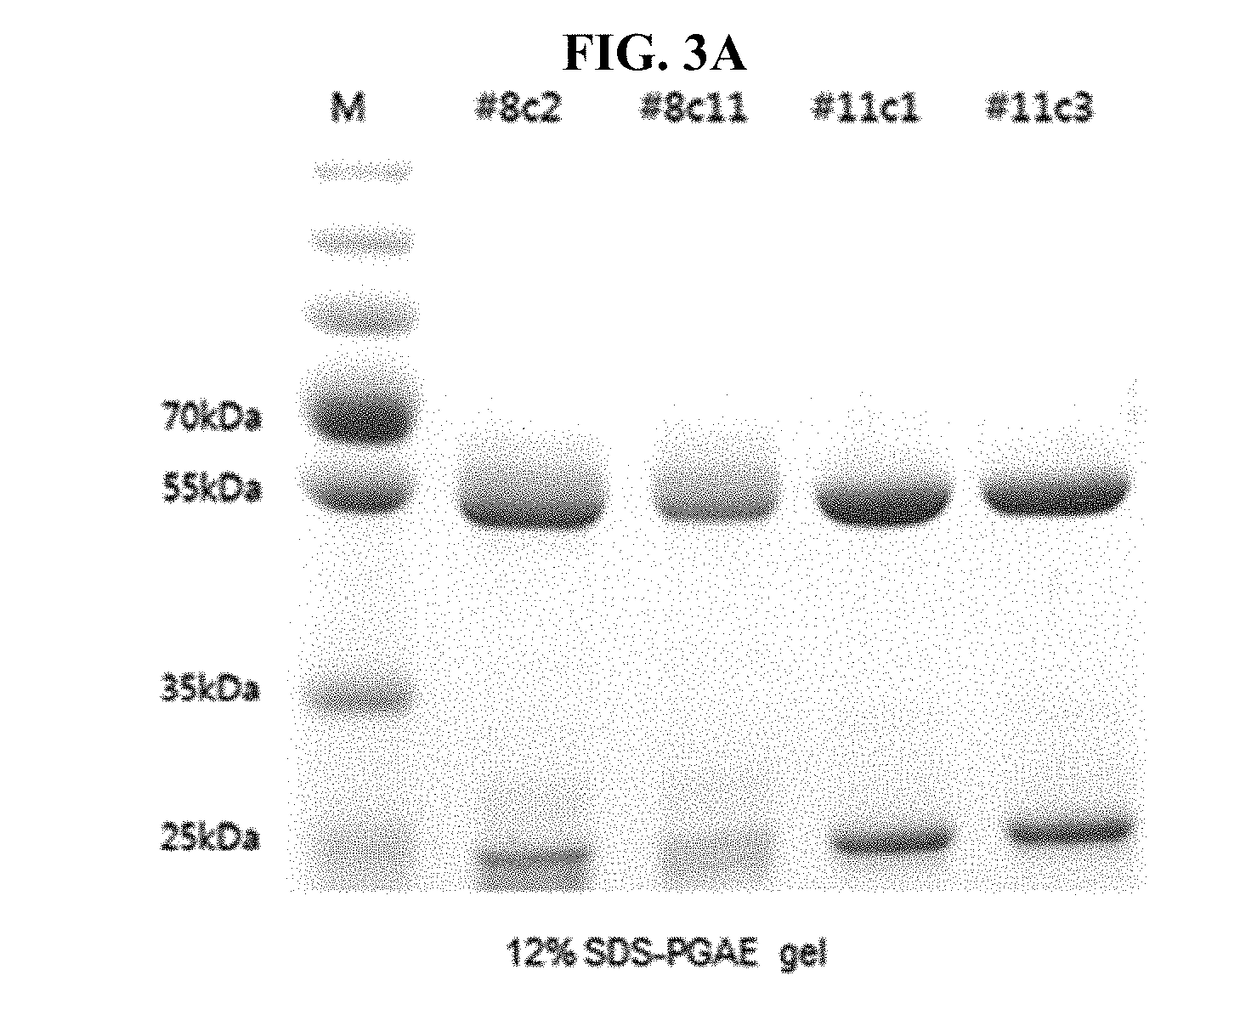 METHOD OF USING CDCs TO DETECT CHOLESTEROL IN A SAMPLE